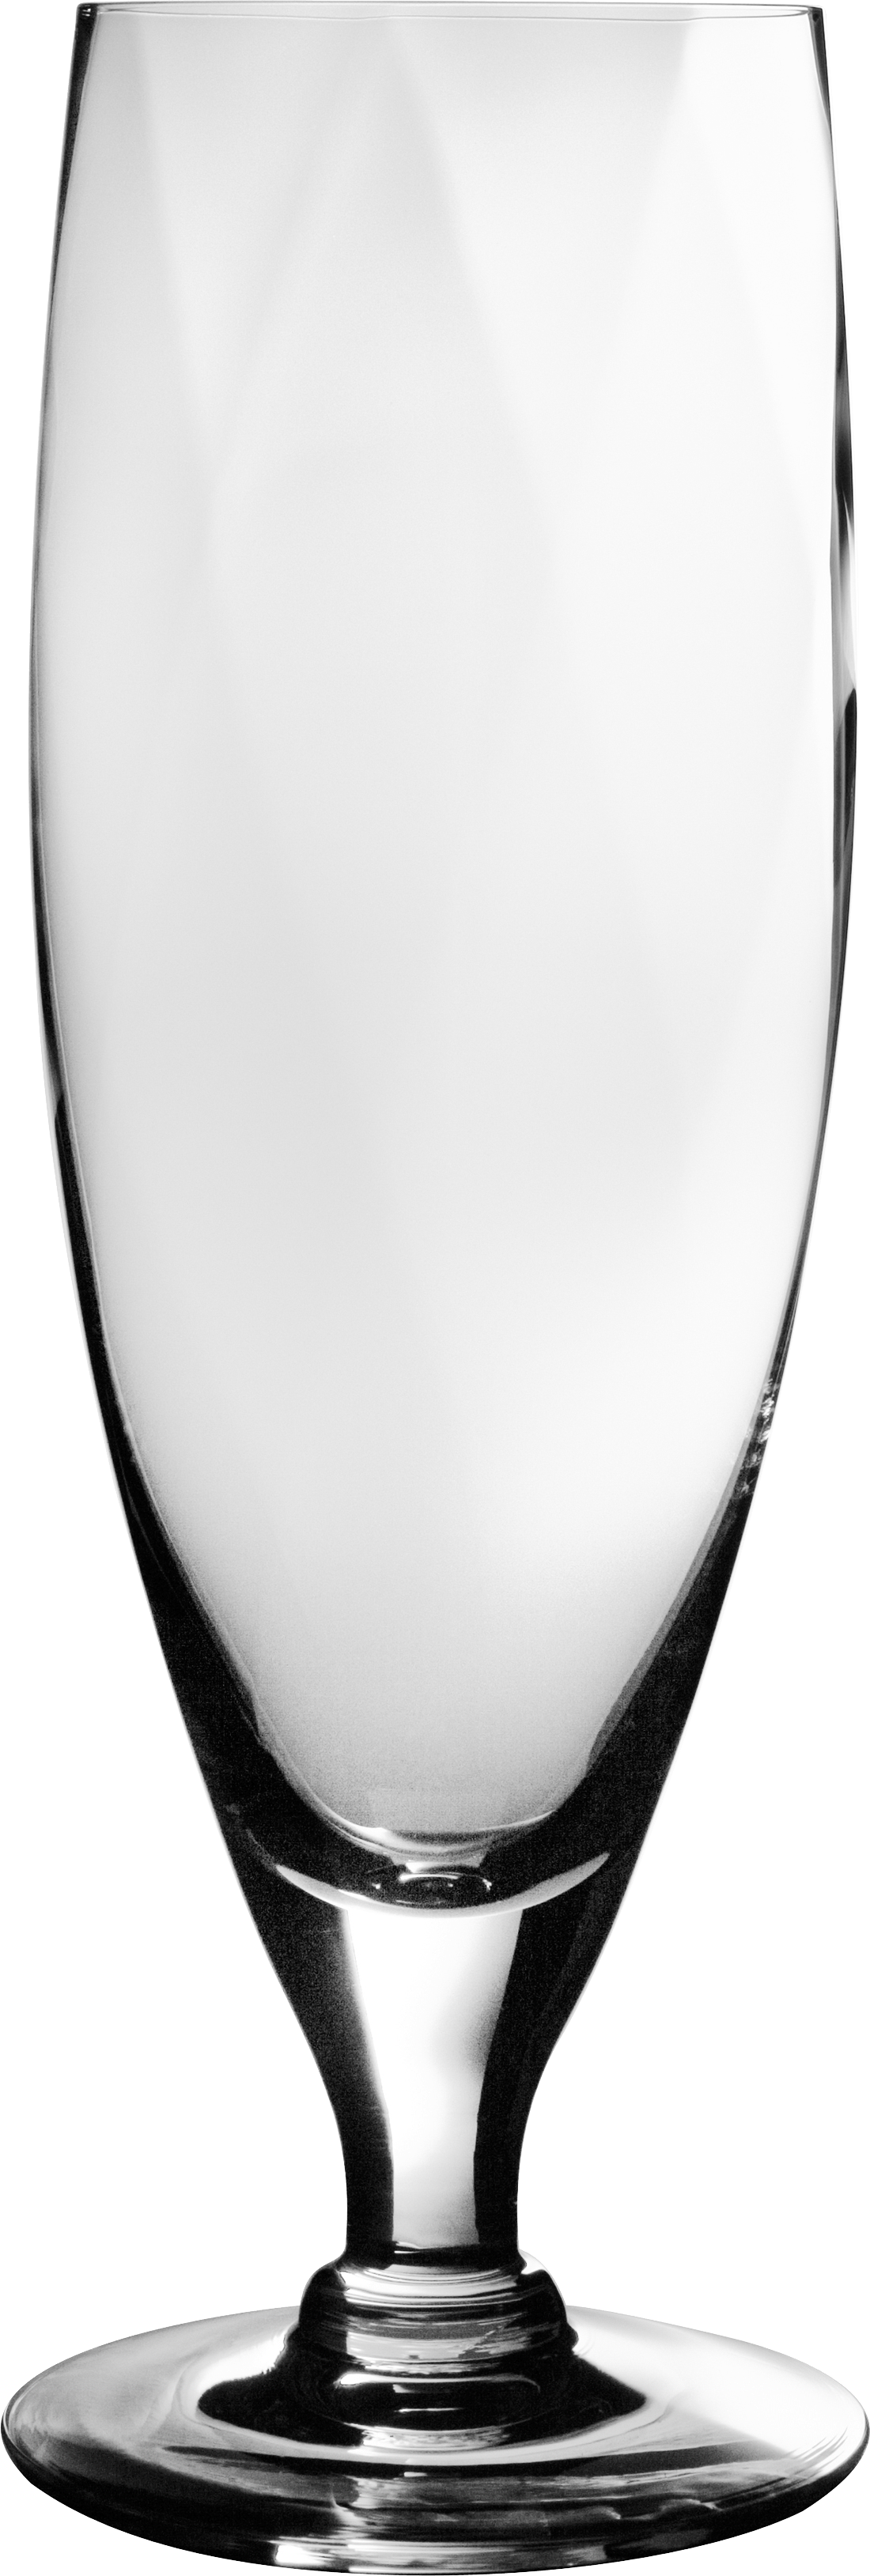 Empty Wine Glass Png Image PNG Image